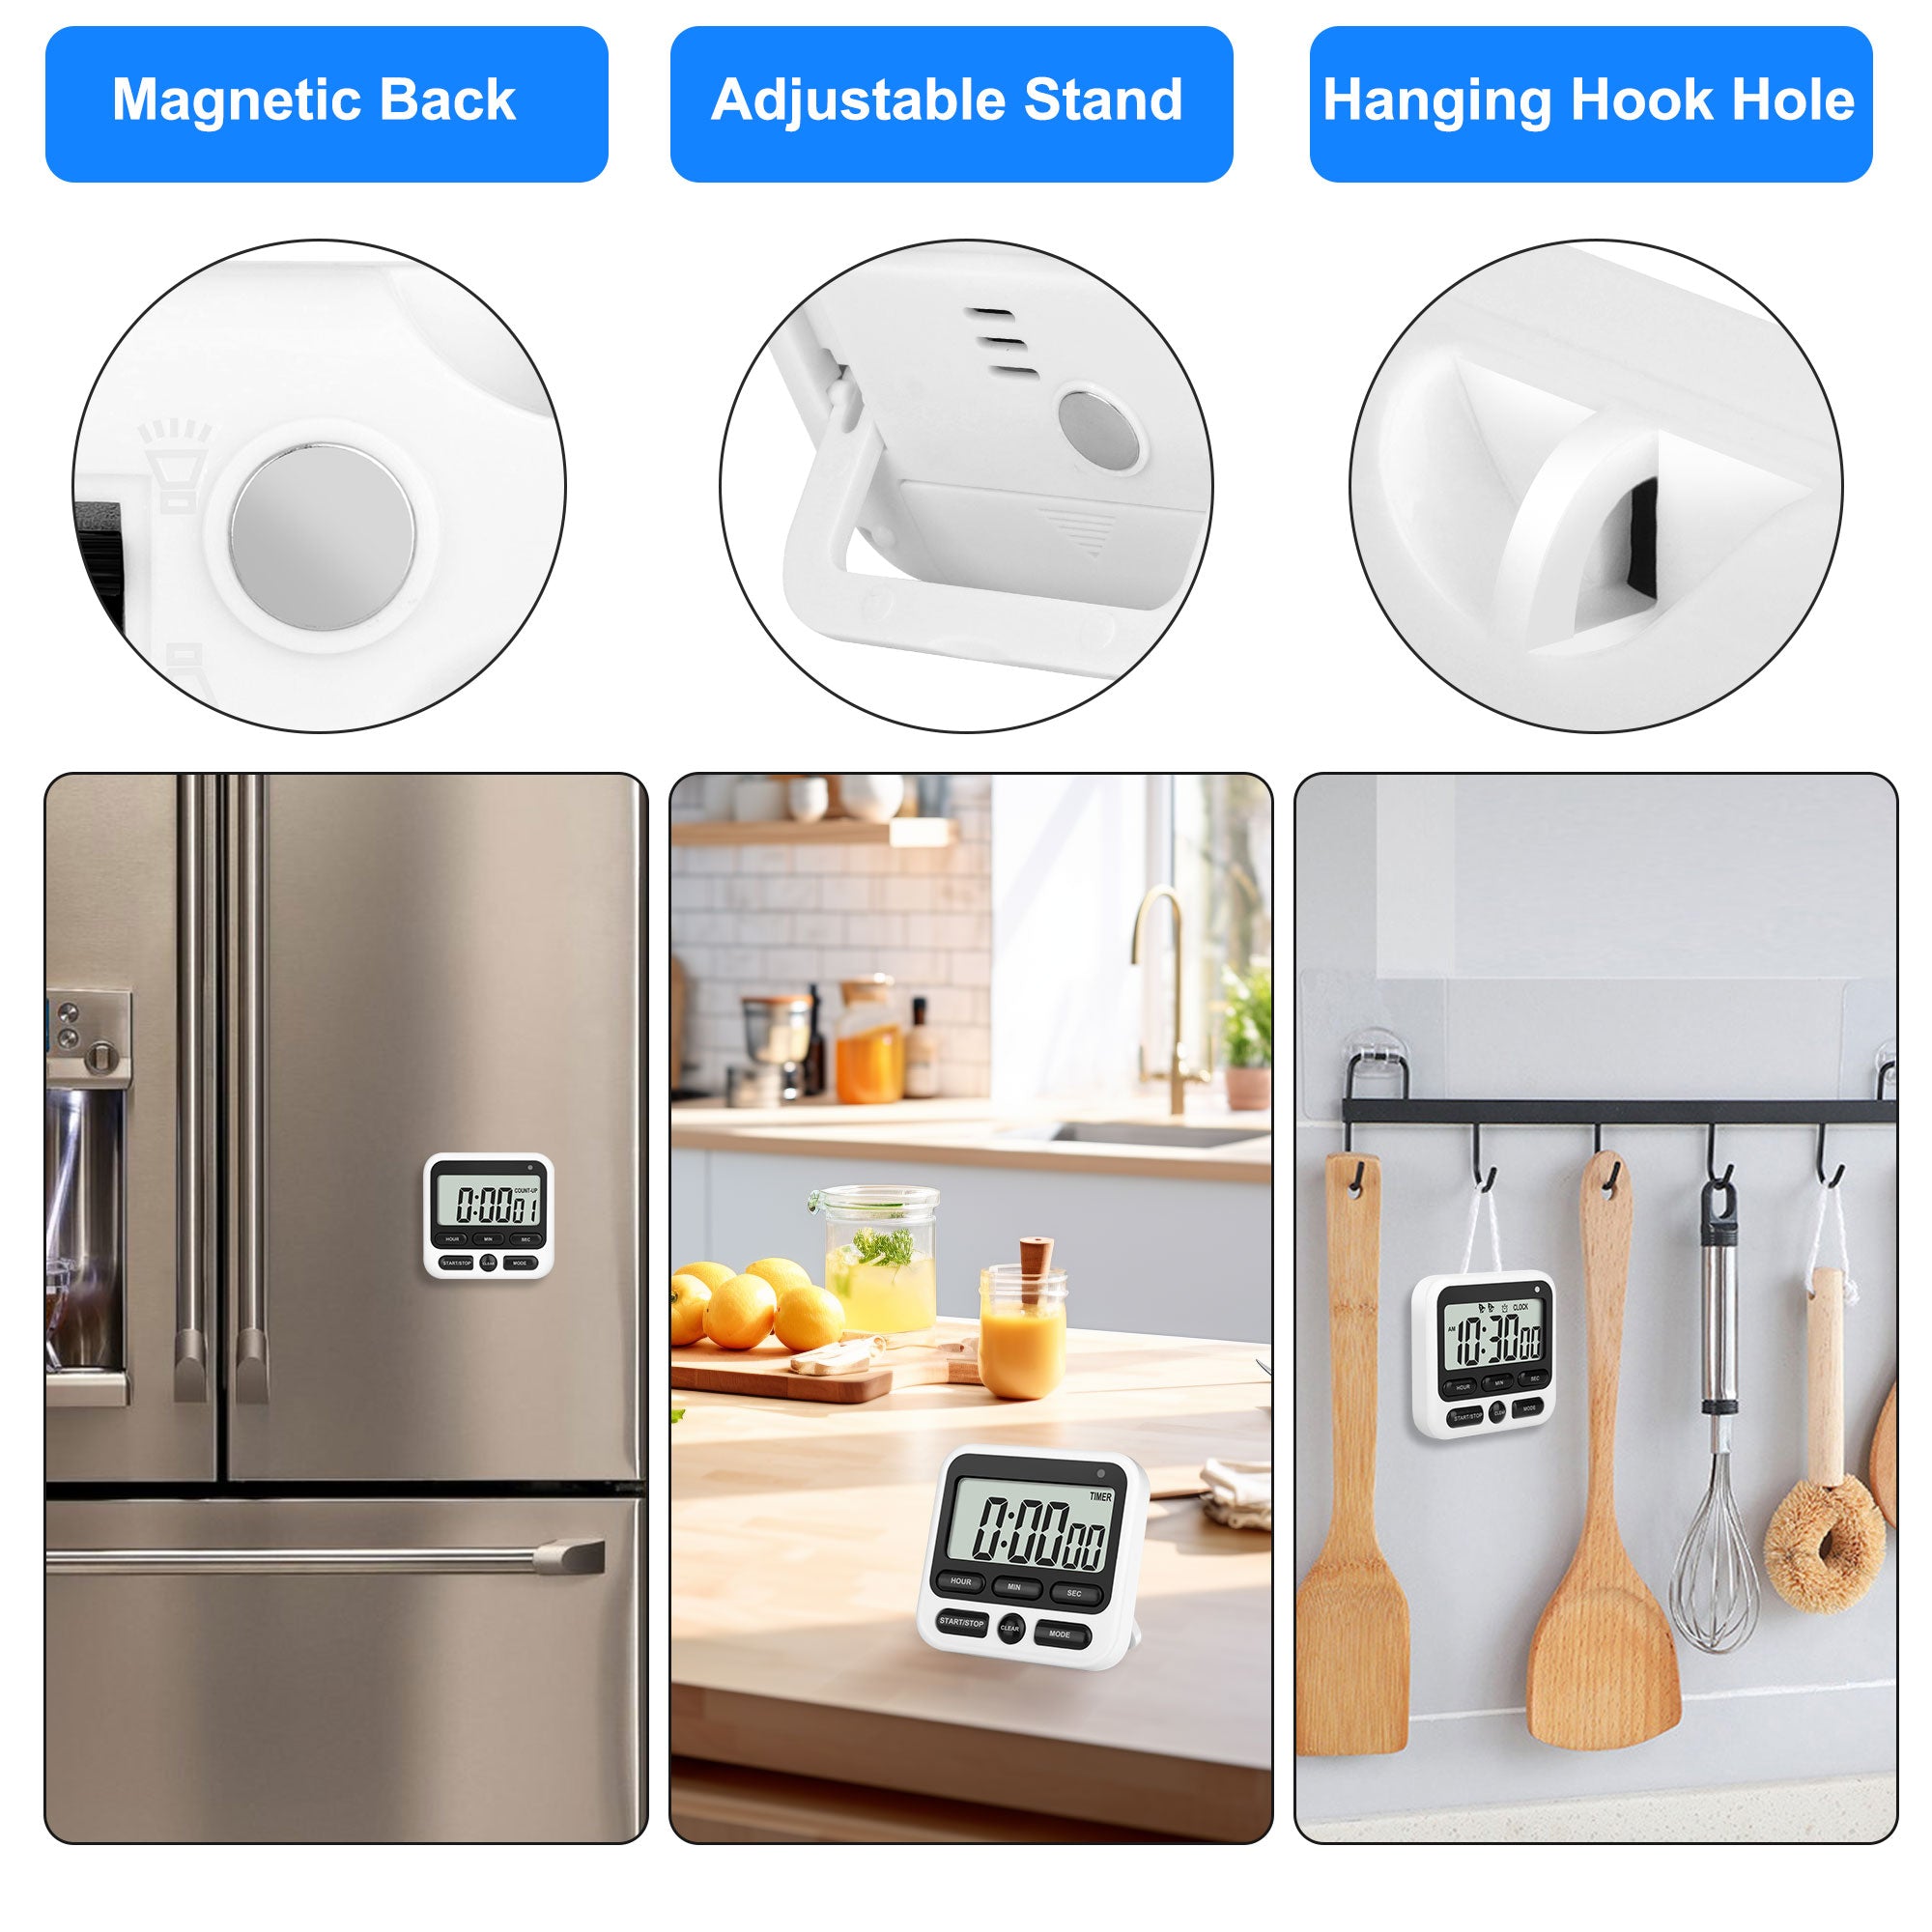 Magnetic Versatile 24 Hour Digital Kitchen Timer with Alarm - Adjustable Stand Count Up/Down & Clock Function and Memory Function (White)